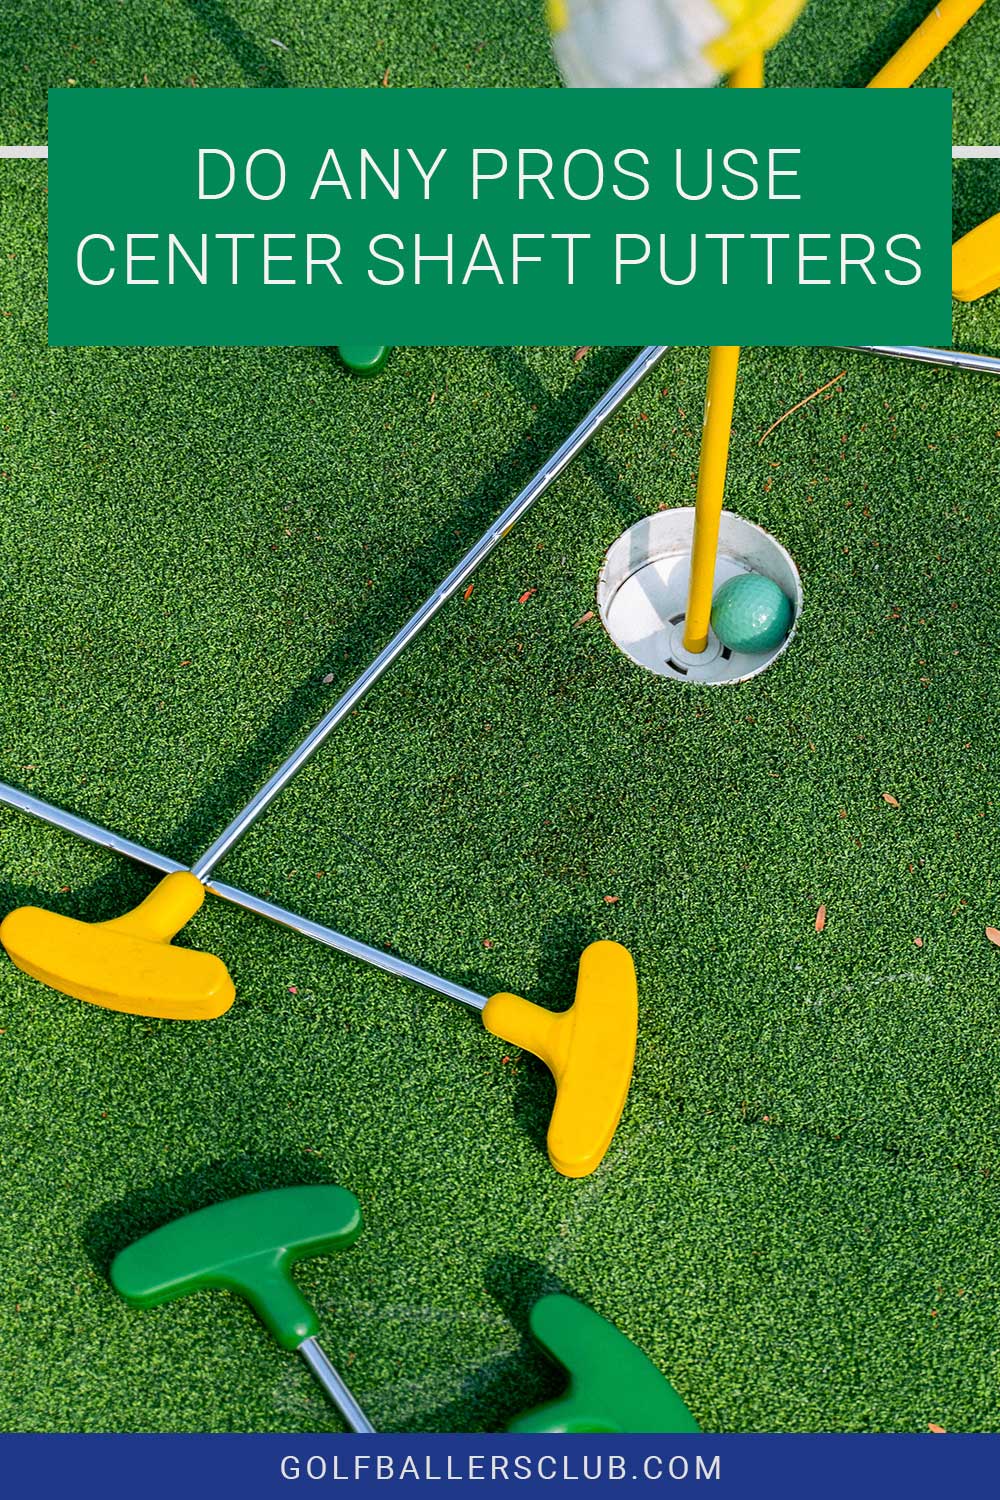 Yellow and Green putters lying down - Do Any Pros Use Center Shaft Putters?